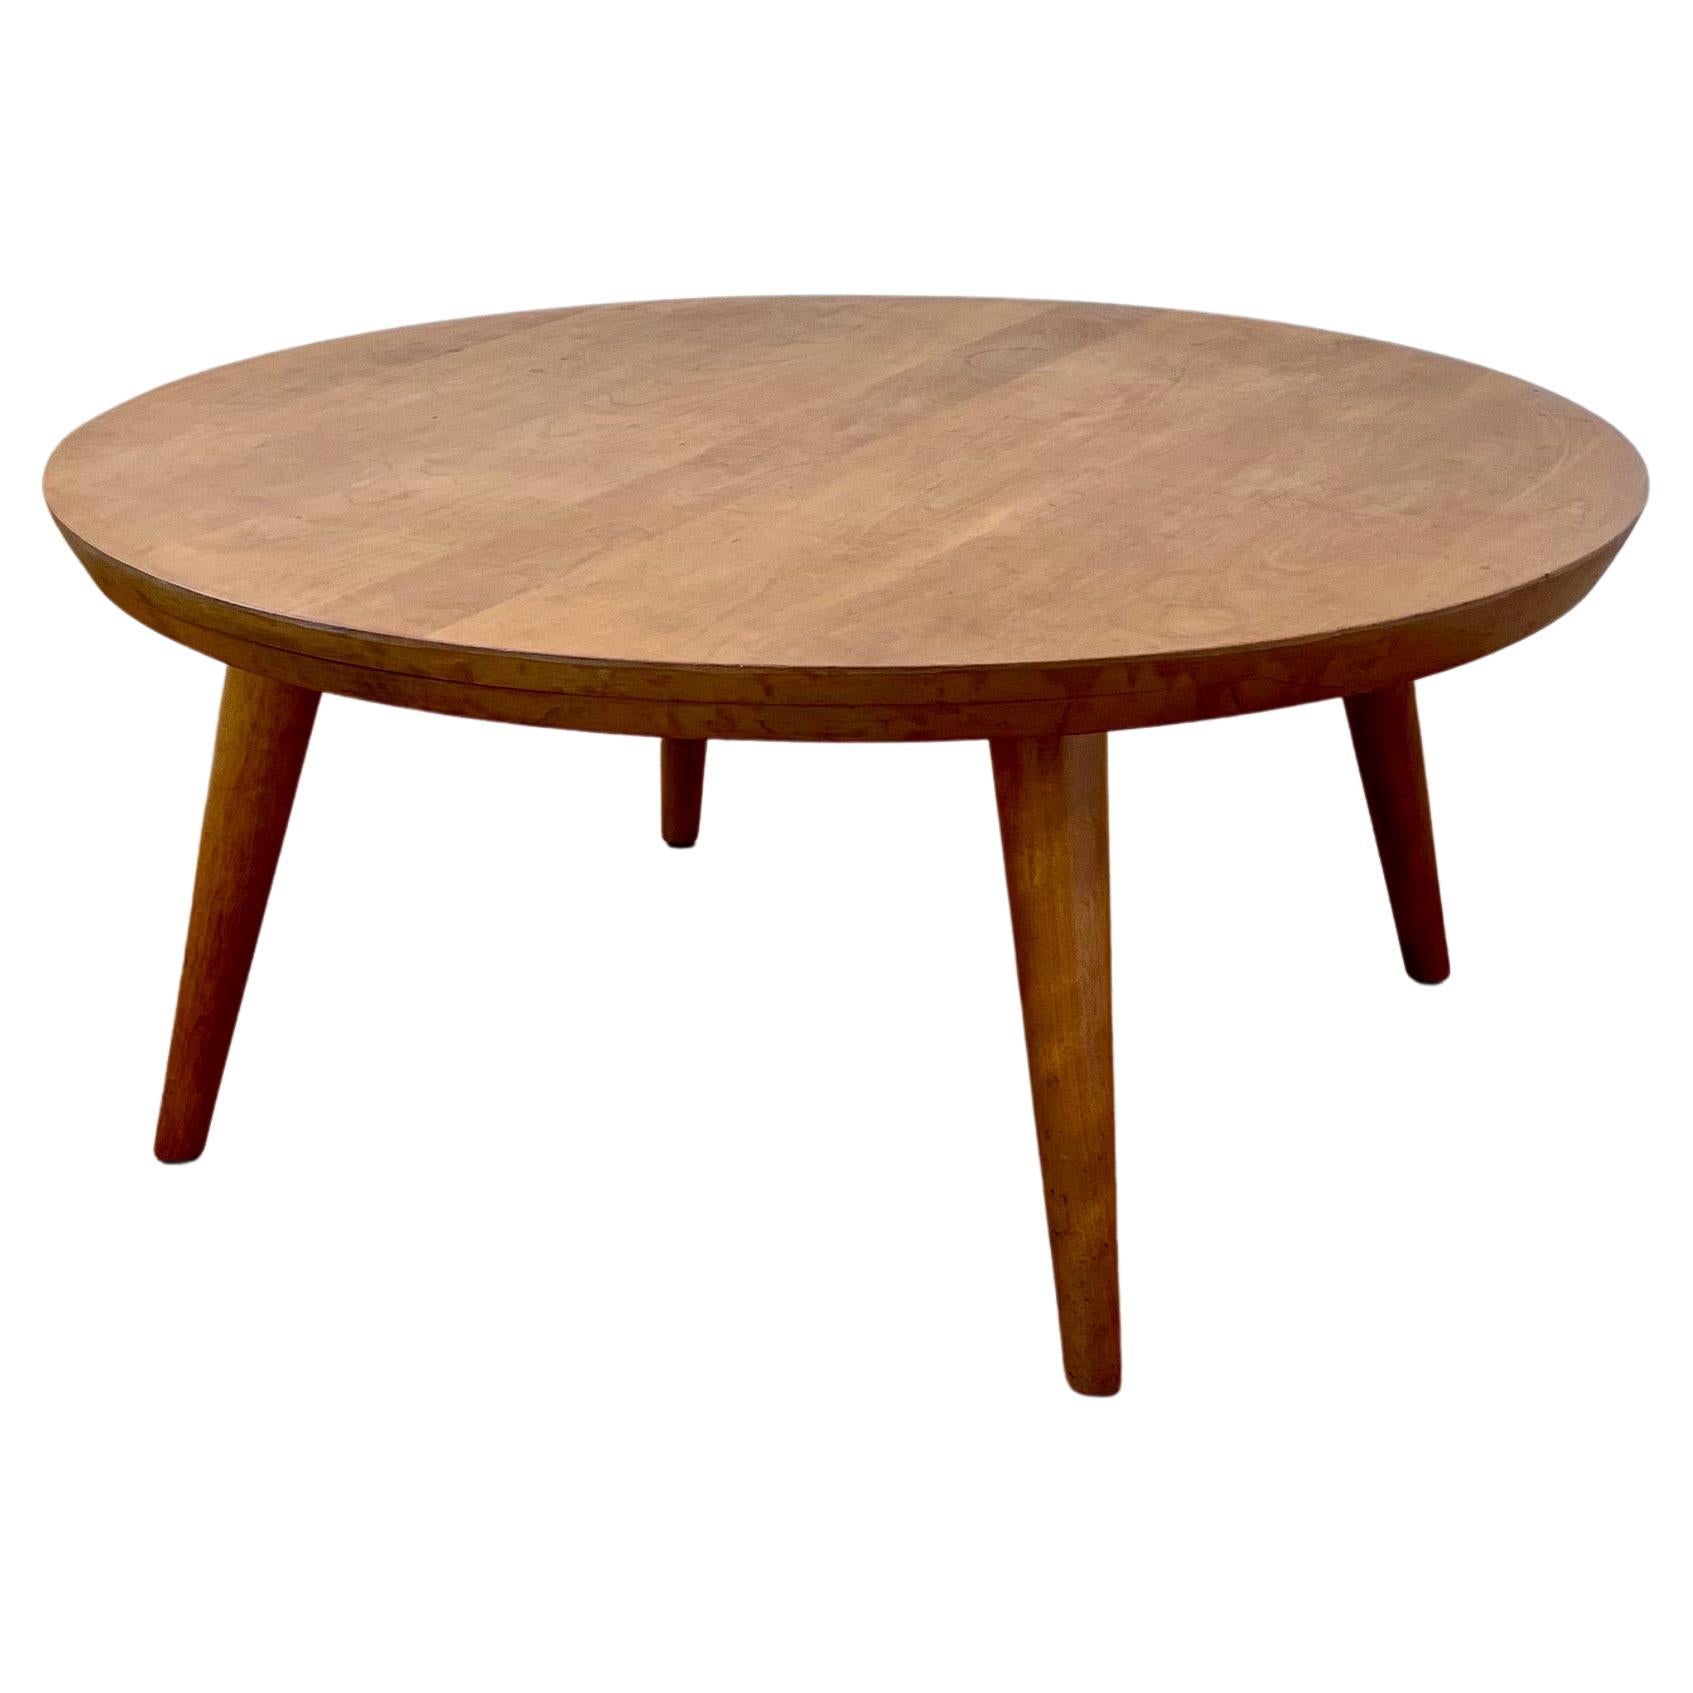 American Mid-Century Modern Solid Honey Maple Coffee Table by Russel Wright